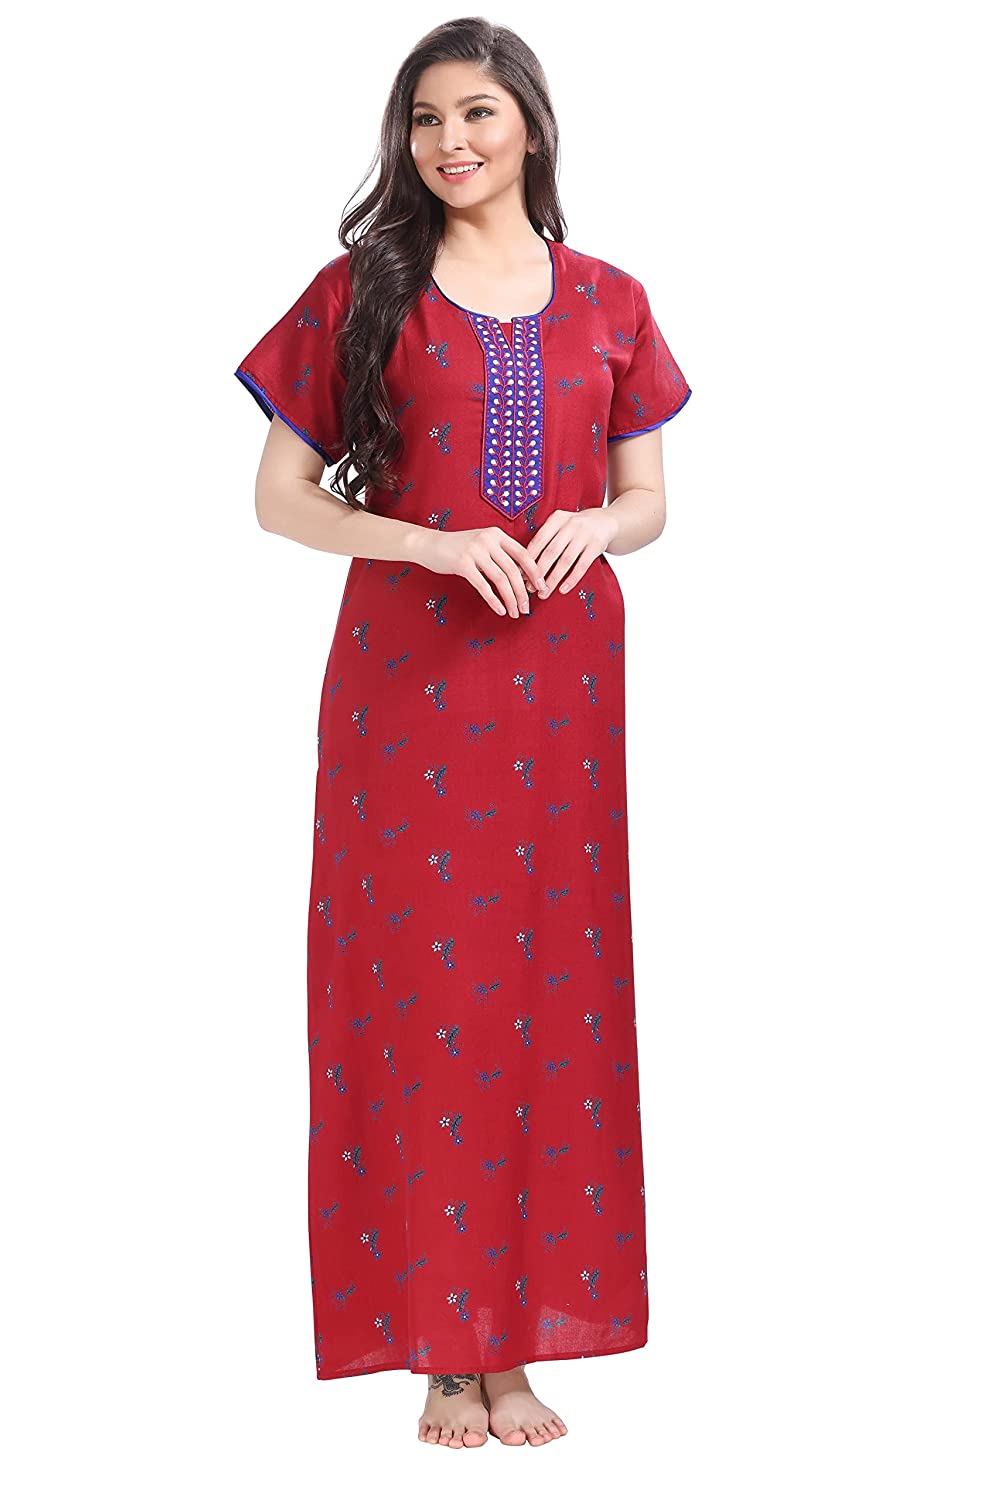 PIU Womens Front Open Premium Cotton Nighty Gown  Pink Buy PIU Womens  Front Open Premium Cotton Nighty Gown  Pink Online at Best Price in India   Nykaa